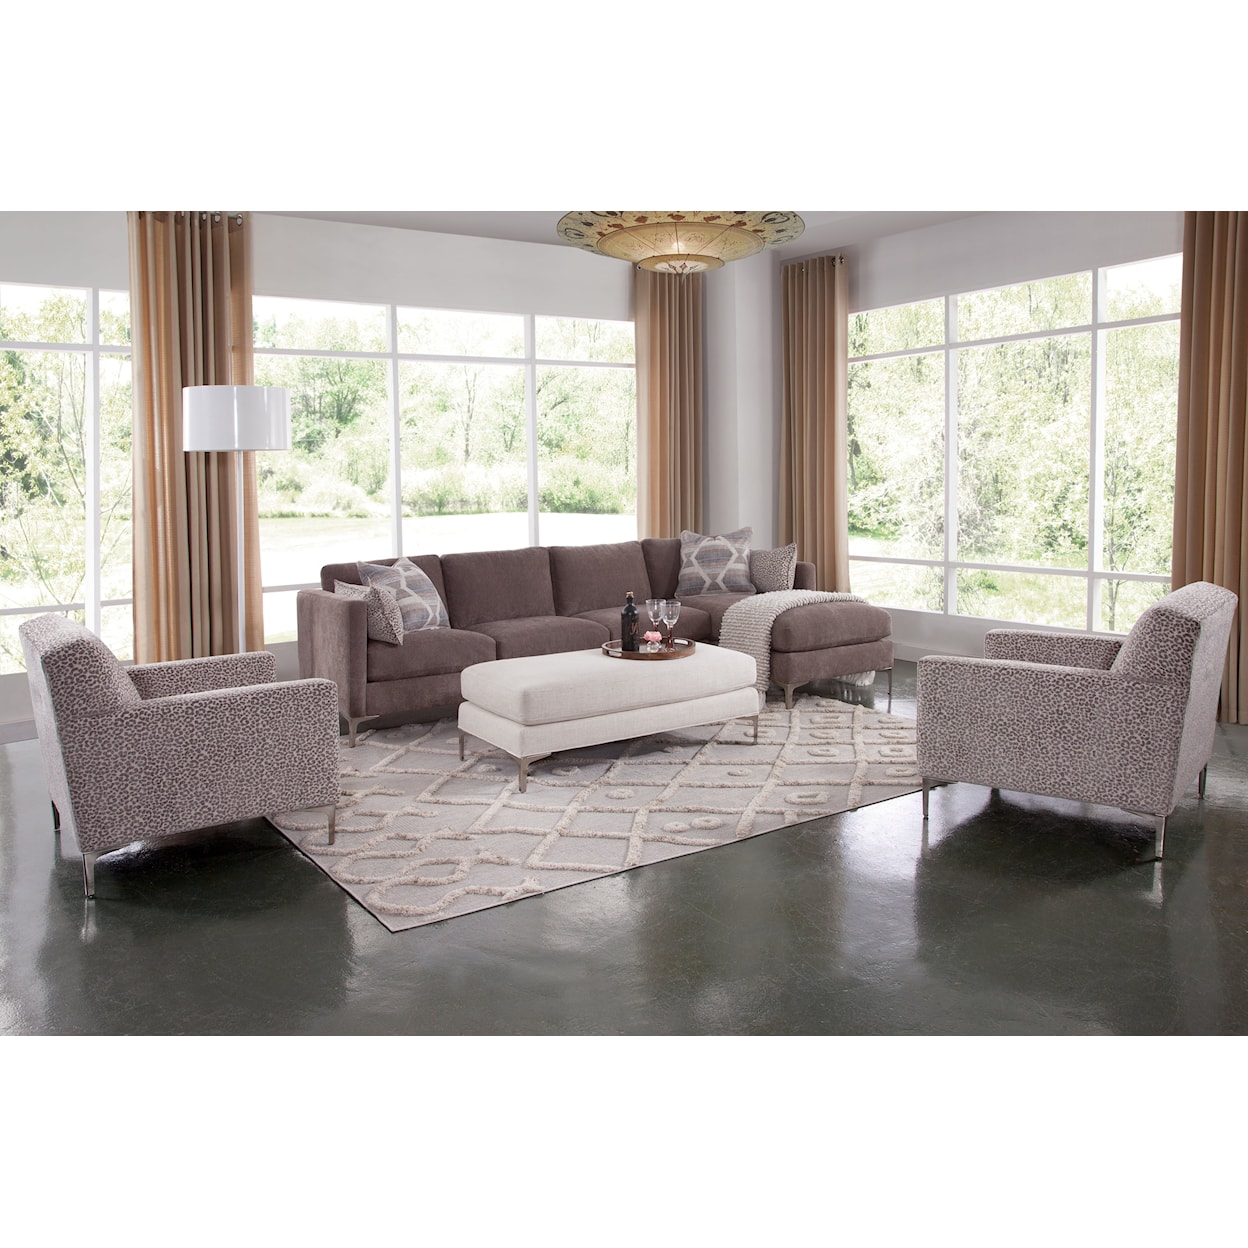 Braxton Culler Lenox Lenox Chaise Sectional with Metal Legs